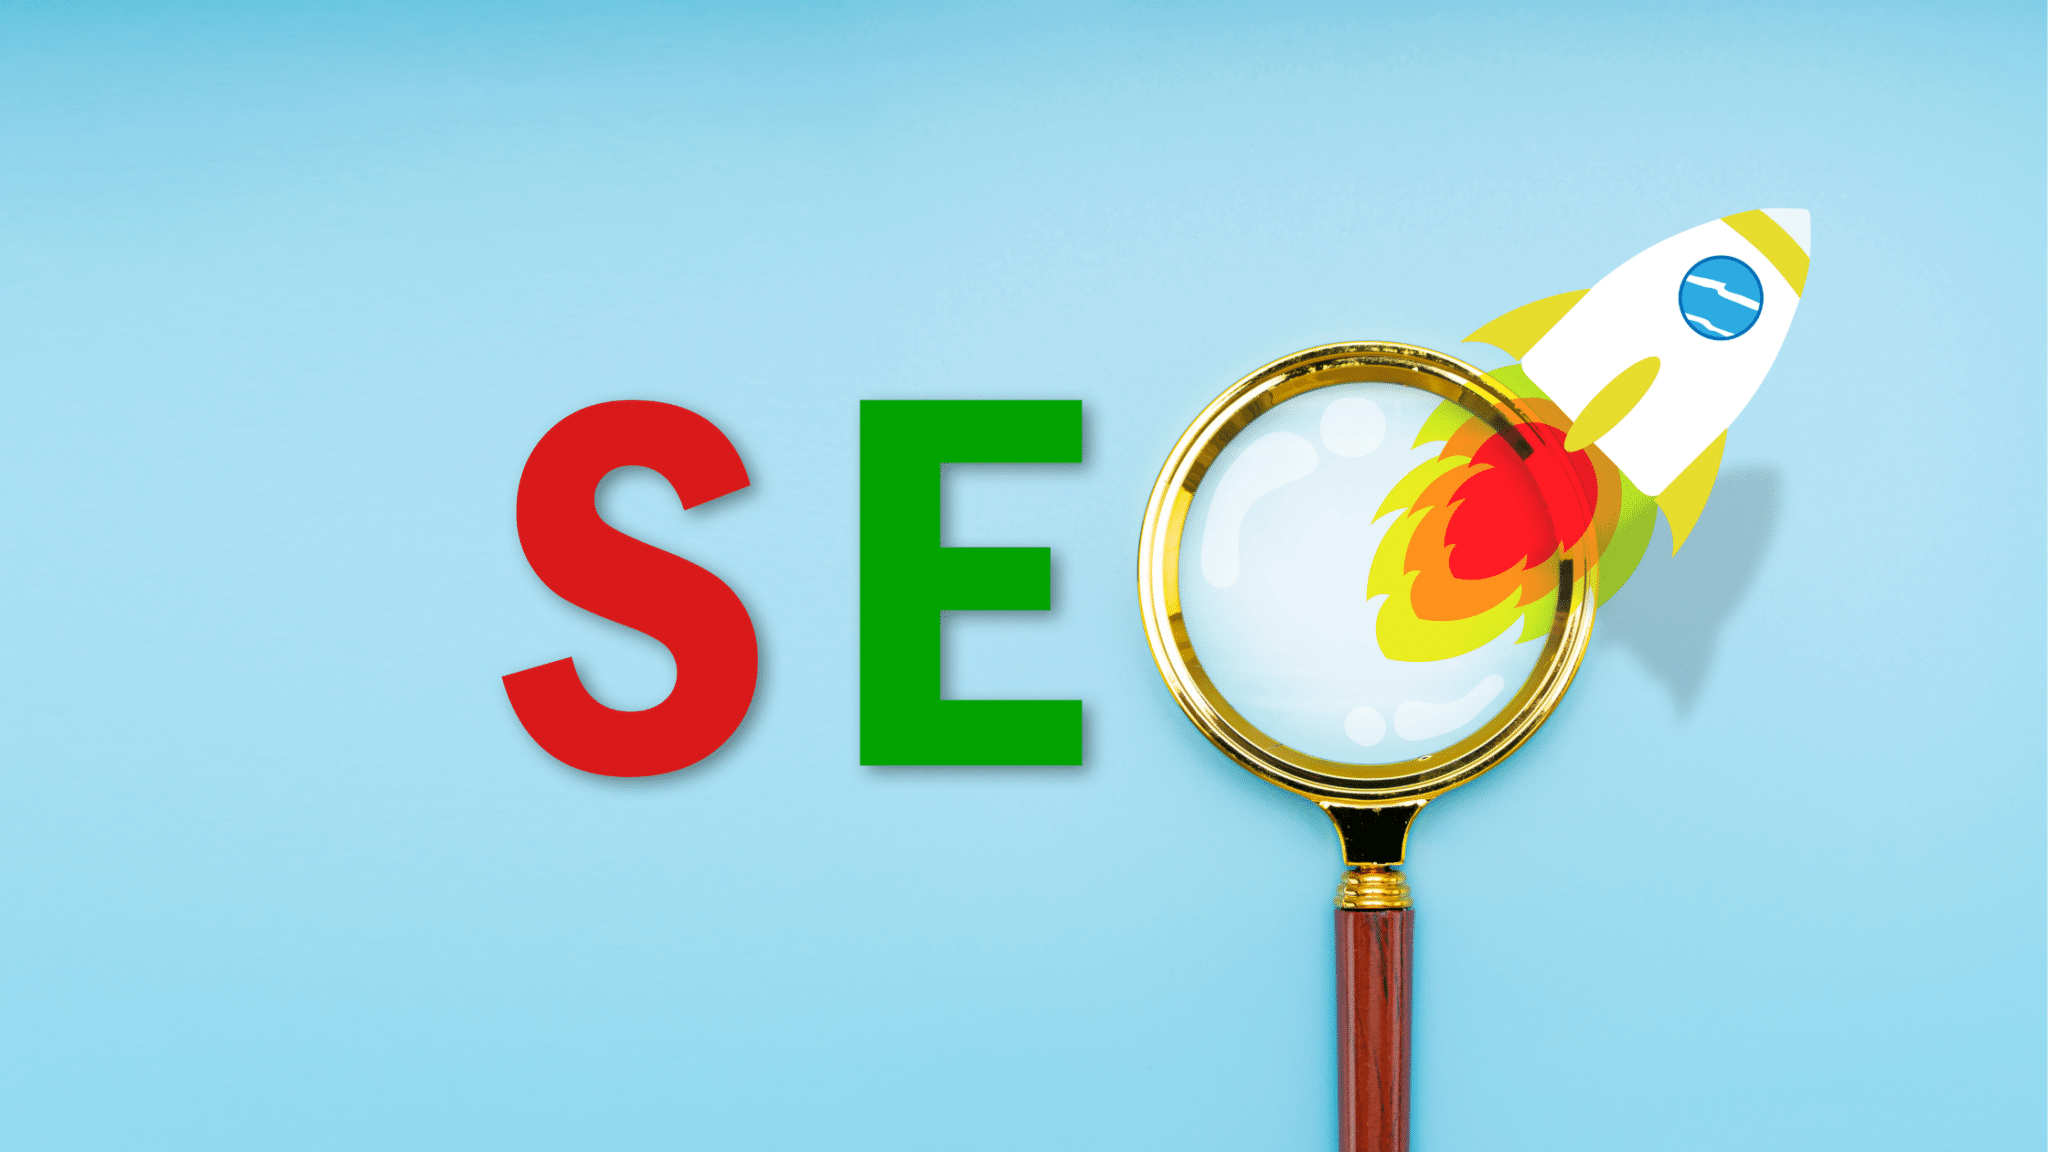 What Is the Main Objective of SEO?